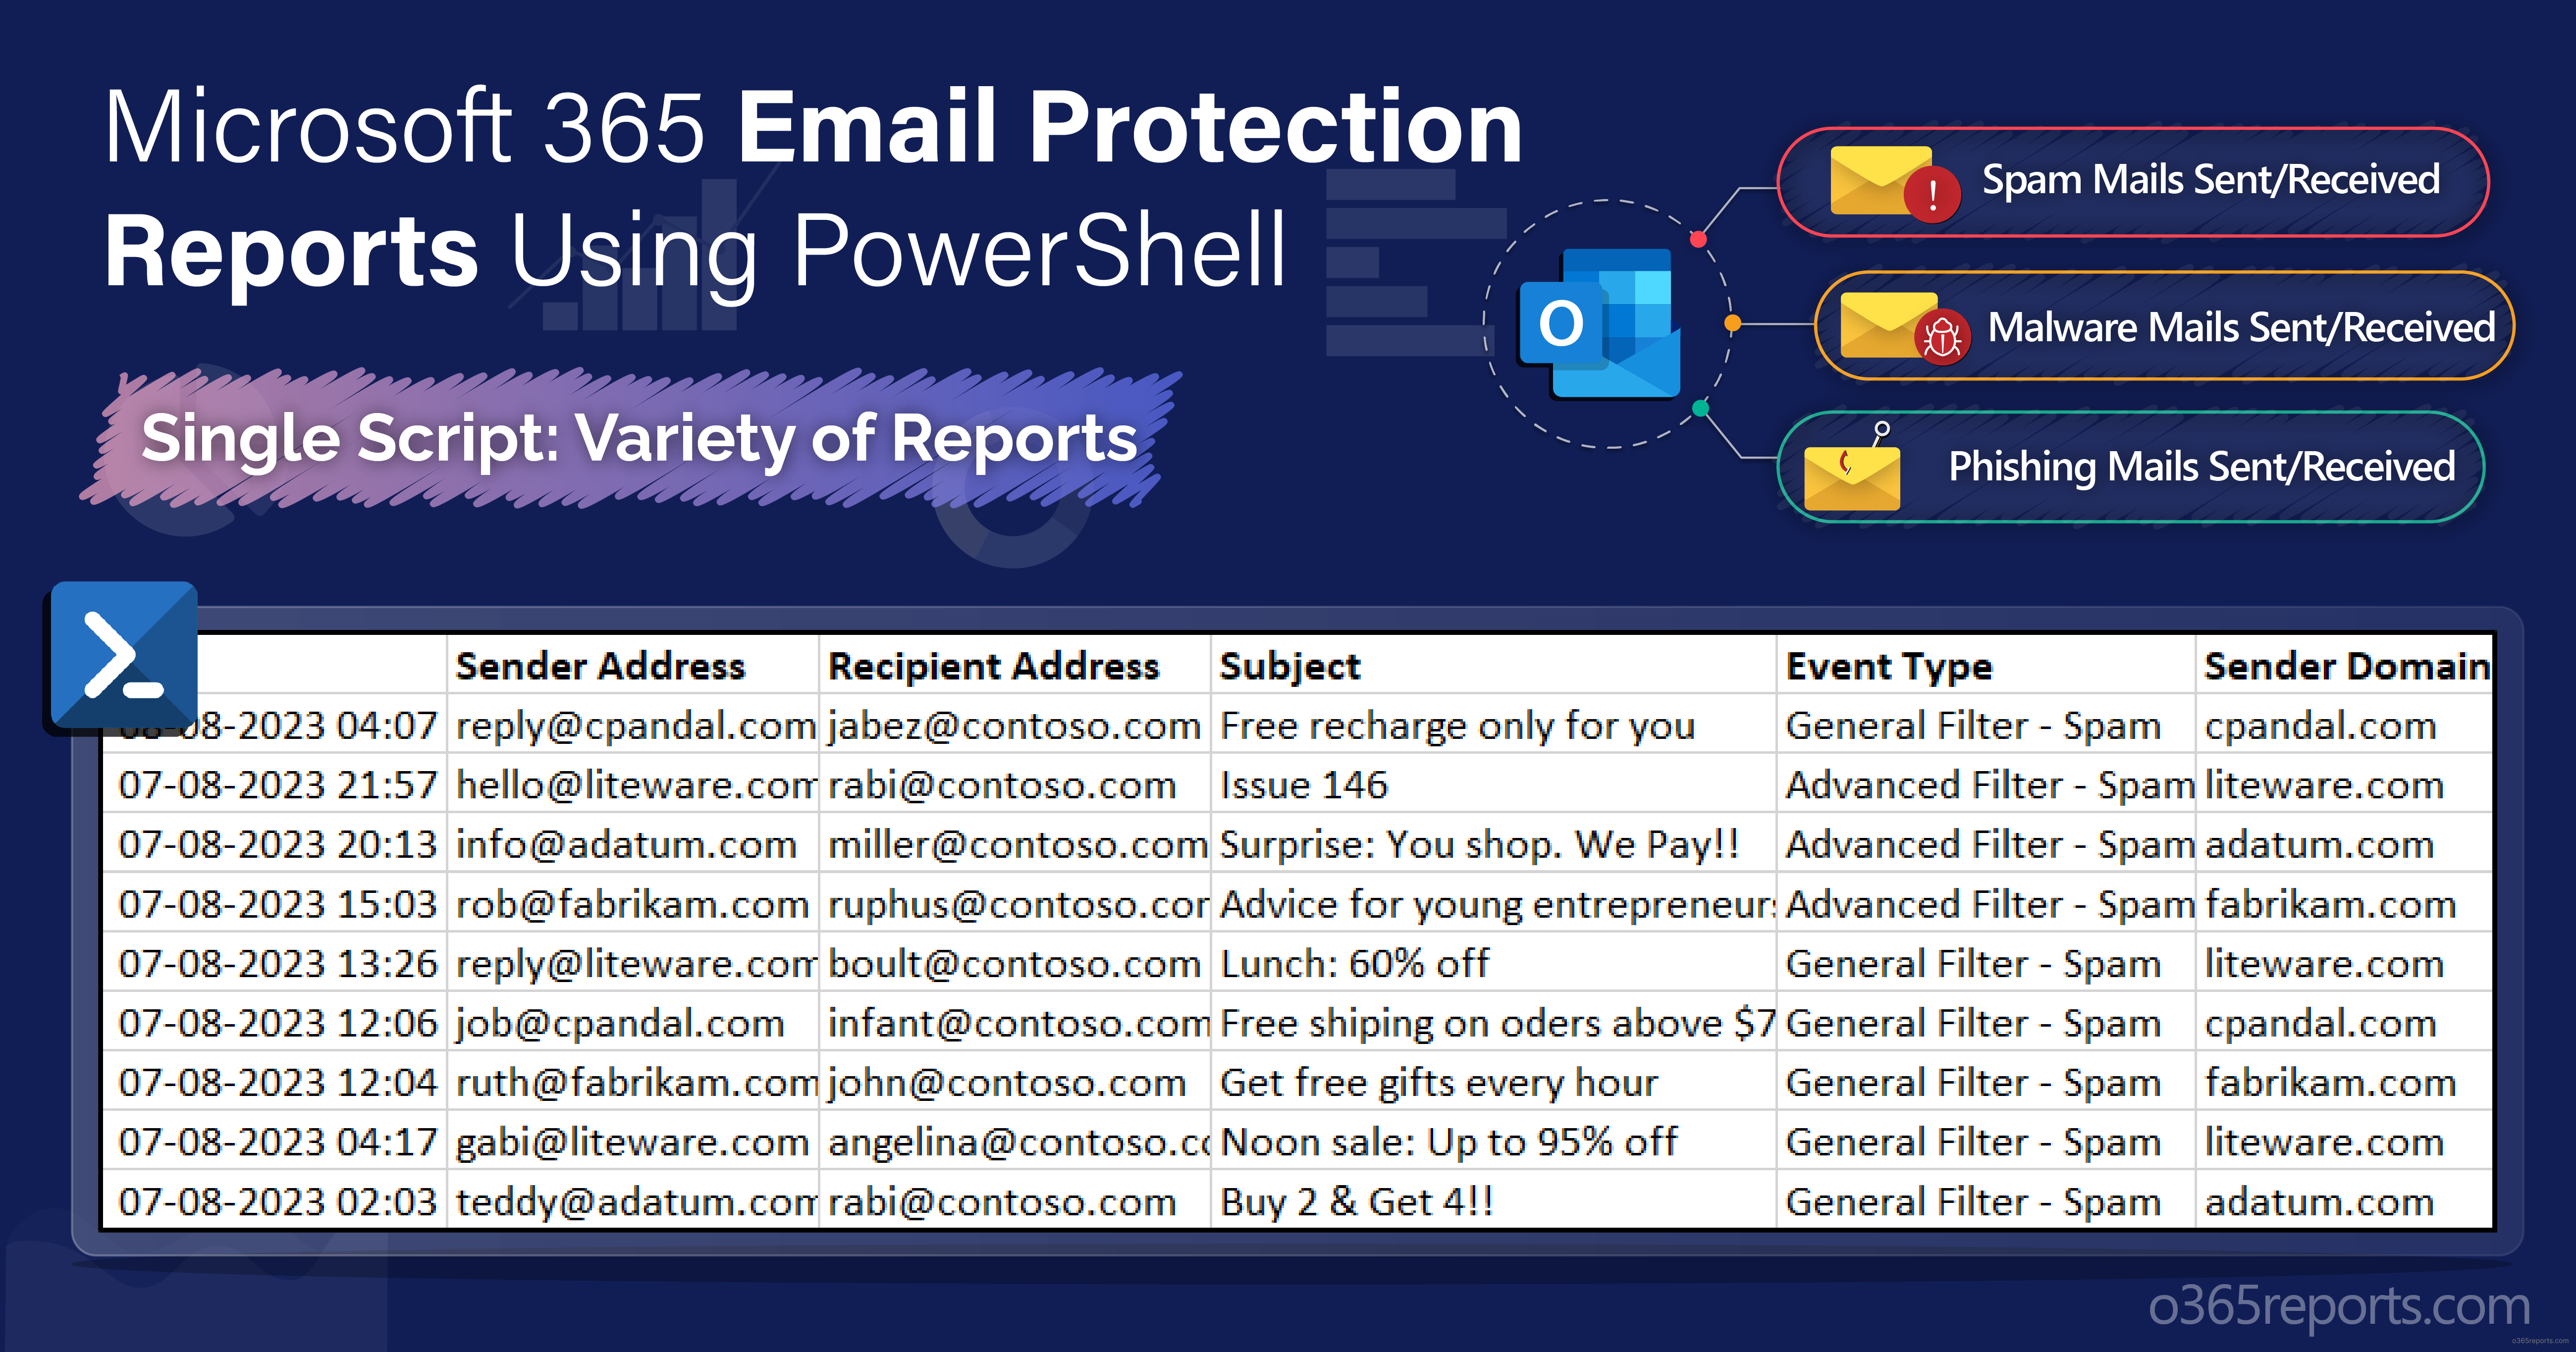 Microsoft 365 Email Protection Reports Using PowerShell